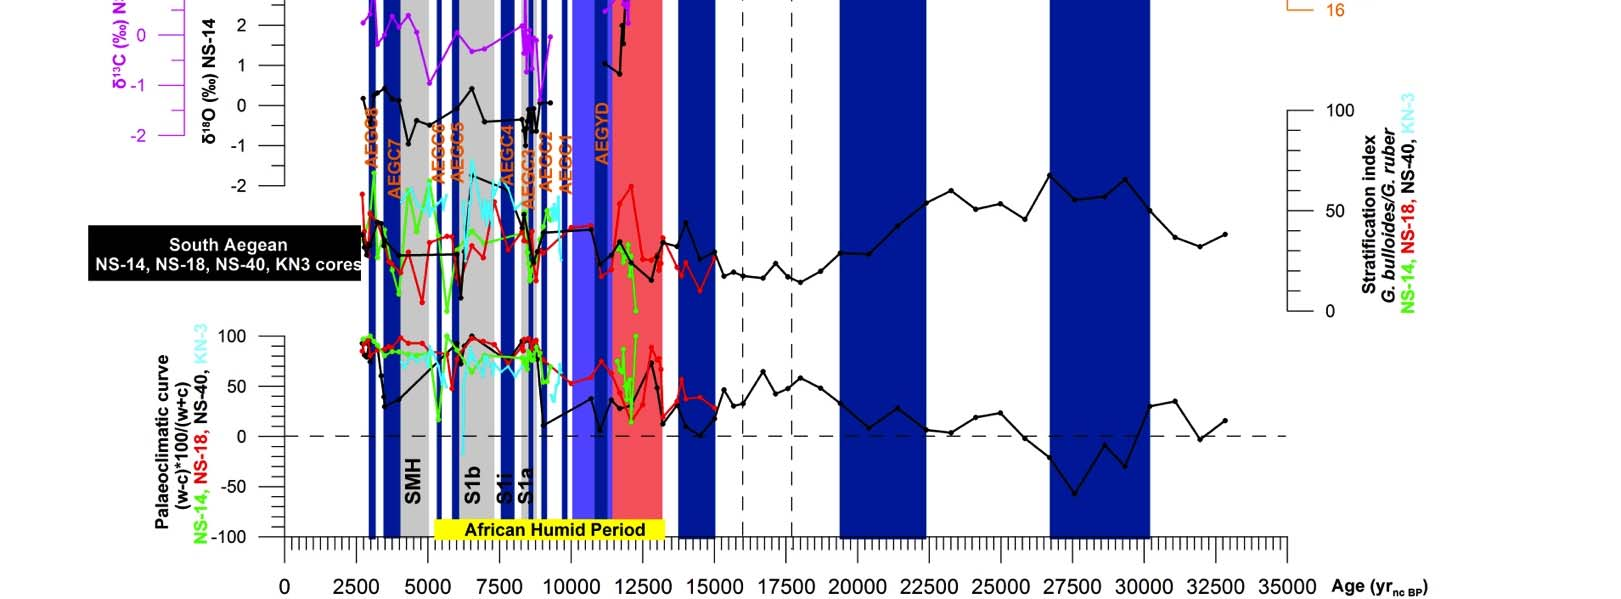 Fig. 7.7: Paleoclimatic curves and stratification index for the studied cores in the south Aegean. Oxygen and carbon isotopes for core NS-14.